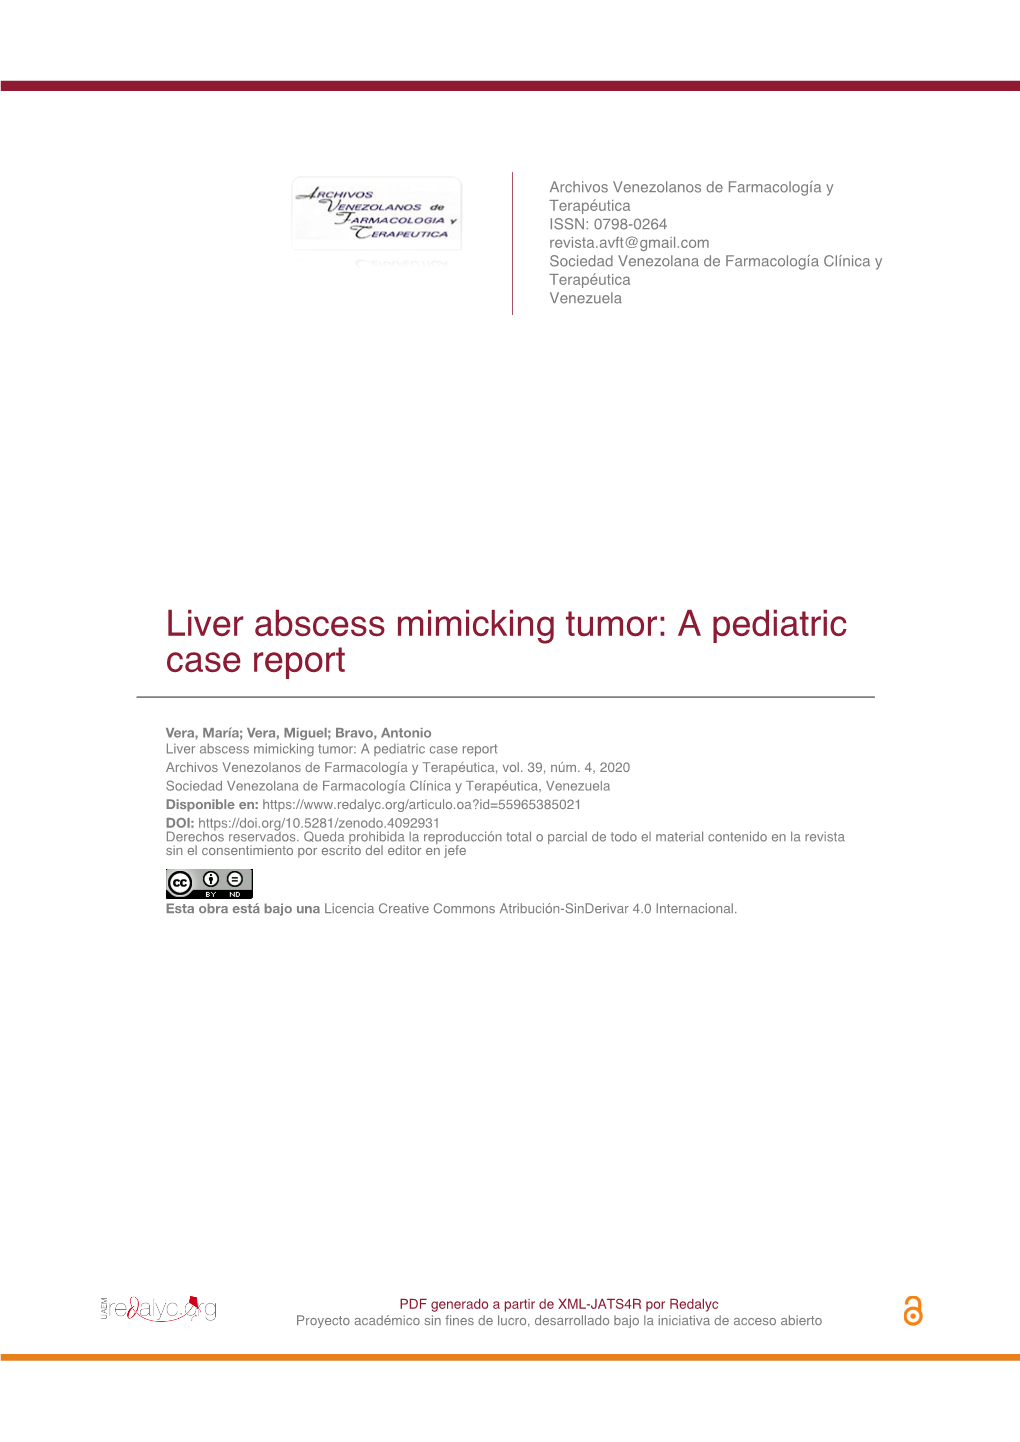 Liver Abscess Mimicking Tumor: a Pediatric Case Report